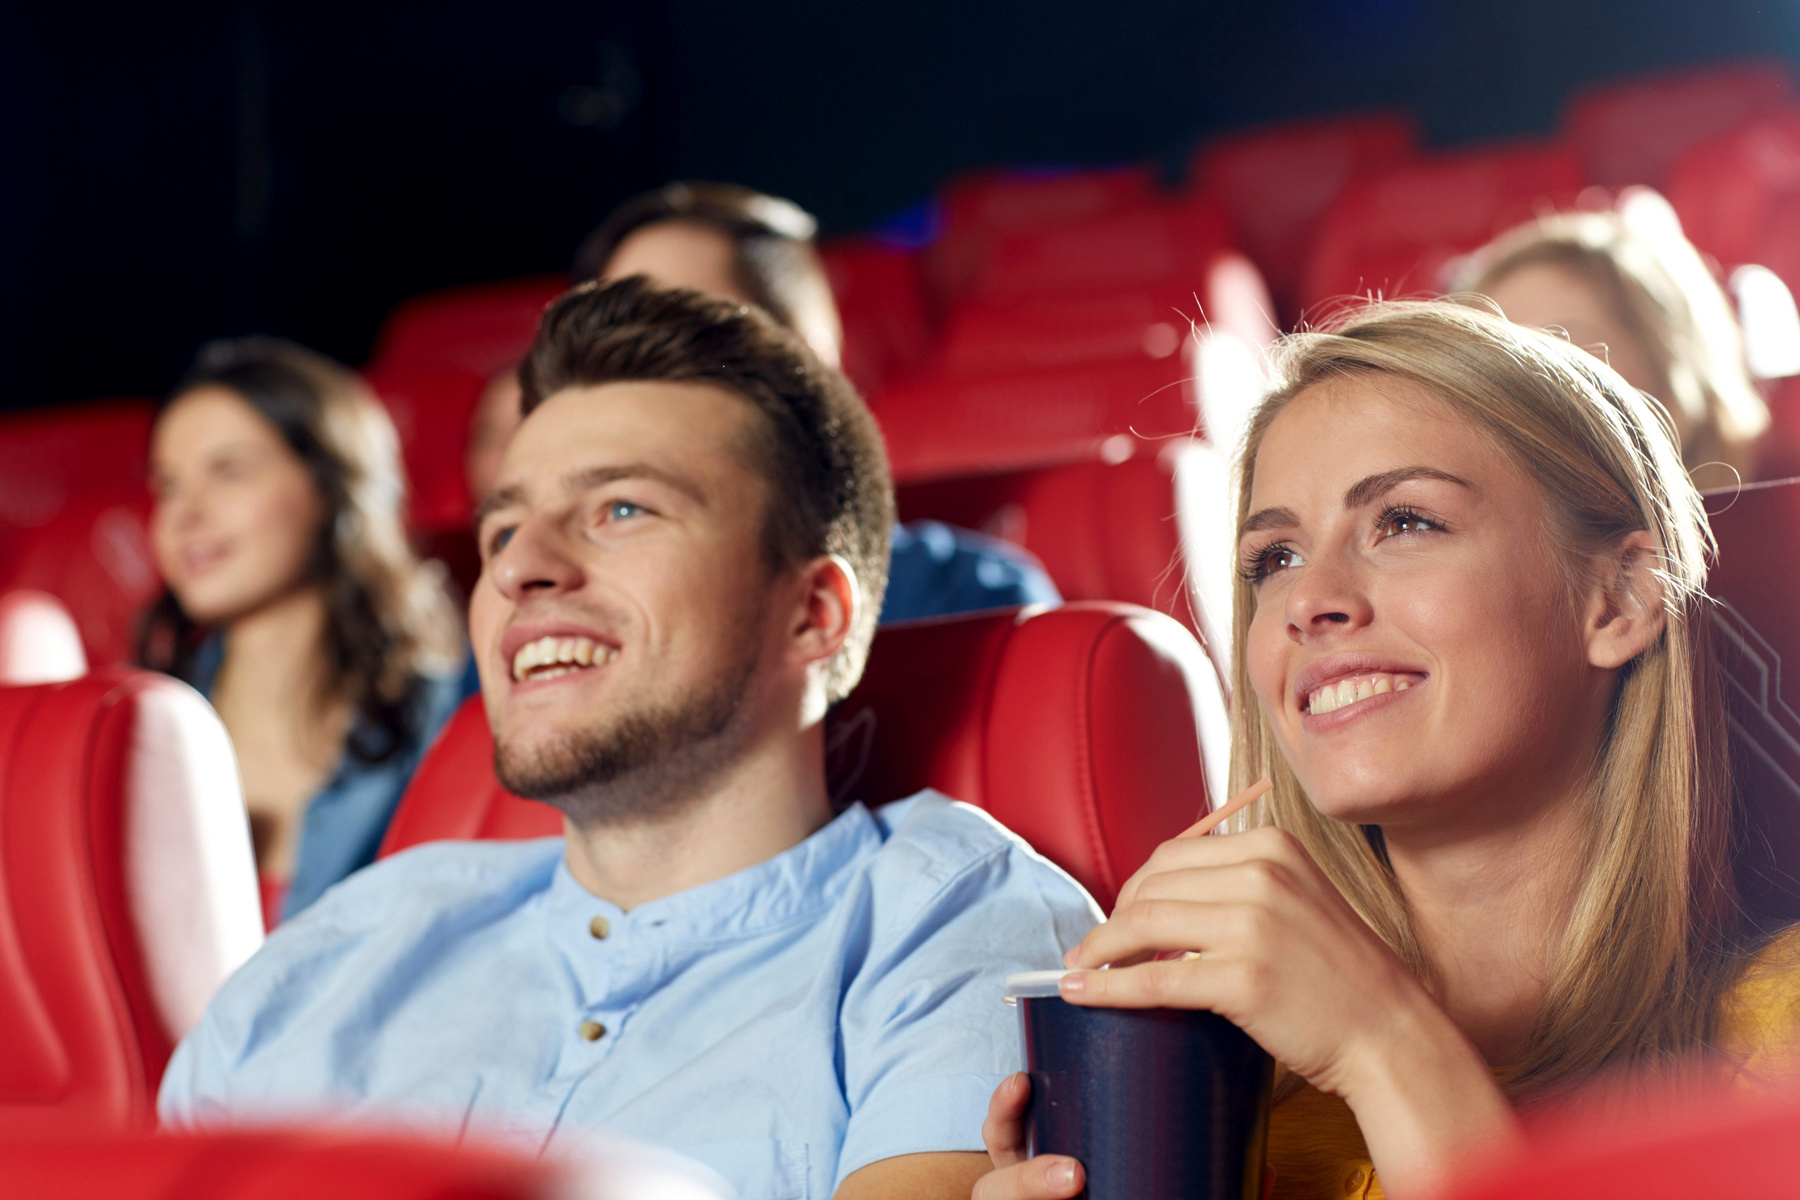 A picture of the couple at the movie date